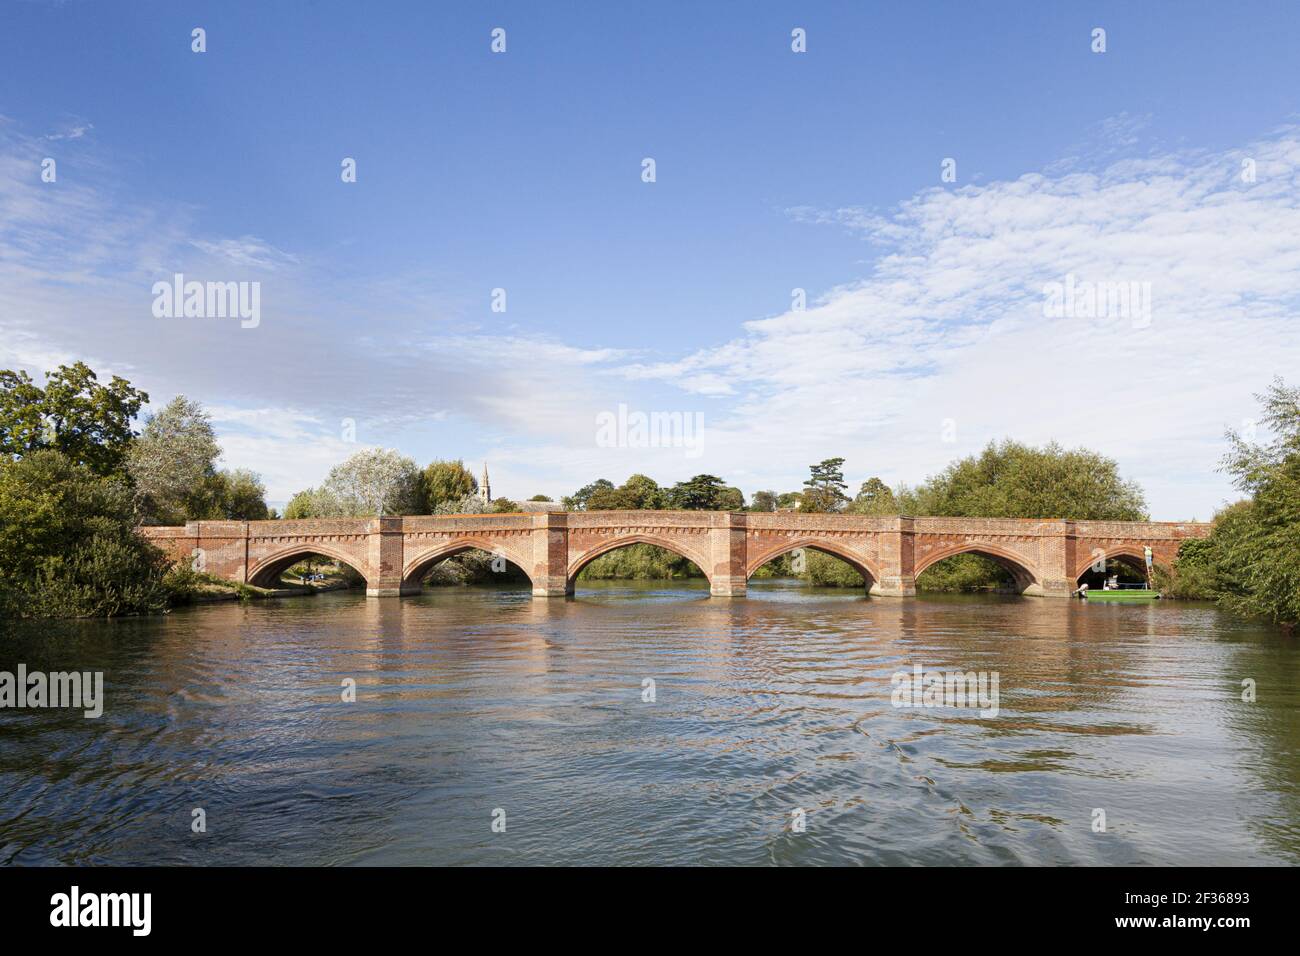 The brick bridge built by Sir Gilbert Scott in 1864 over the River Thames at Clifton Hampden, Oxfordshire, UK Stock Photo